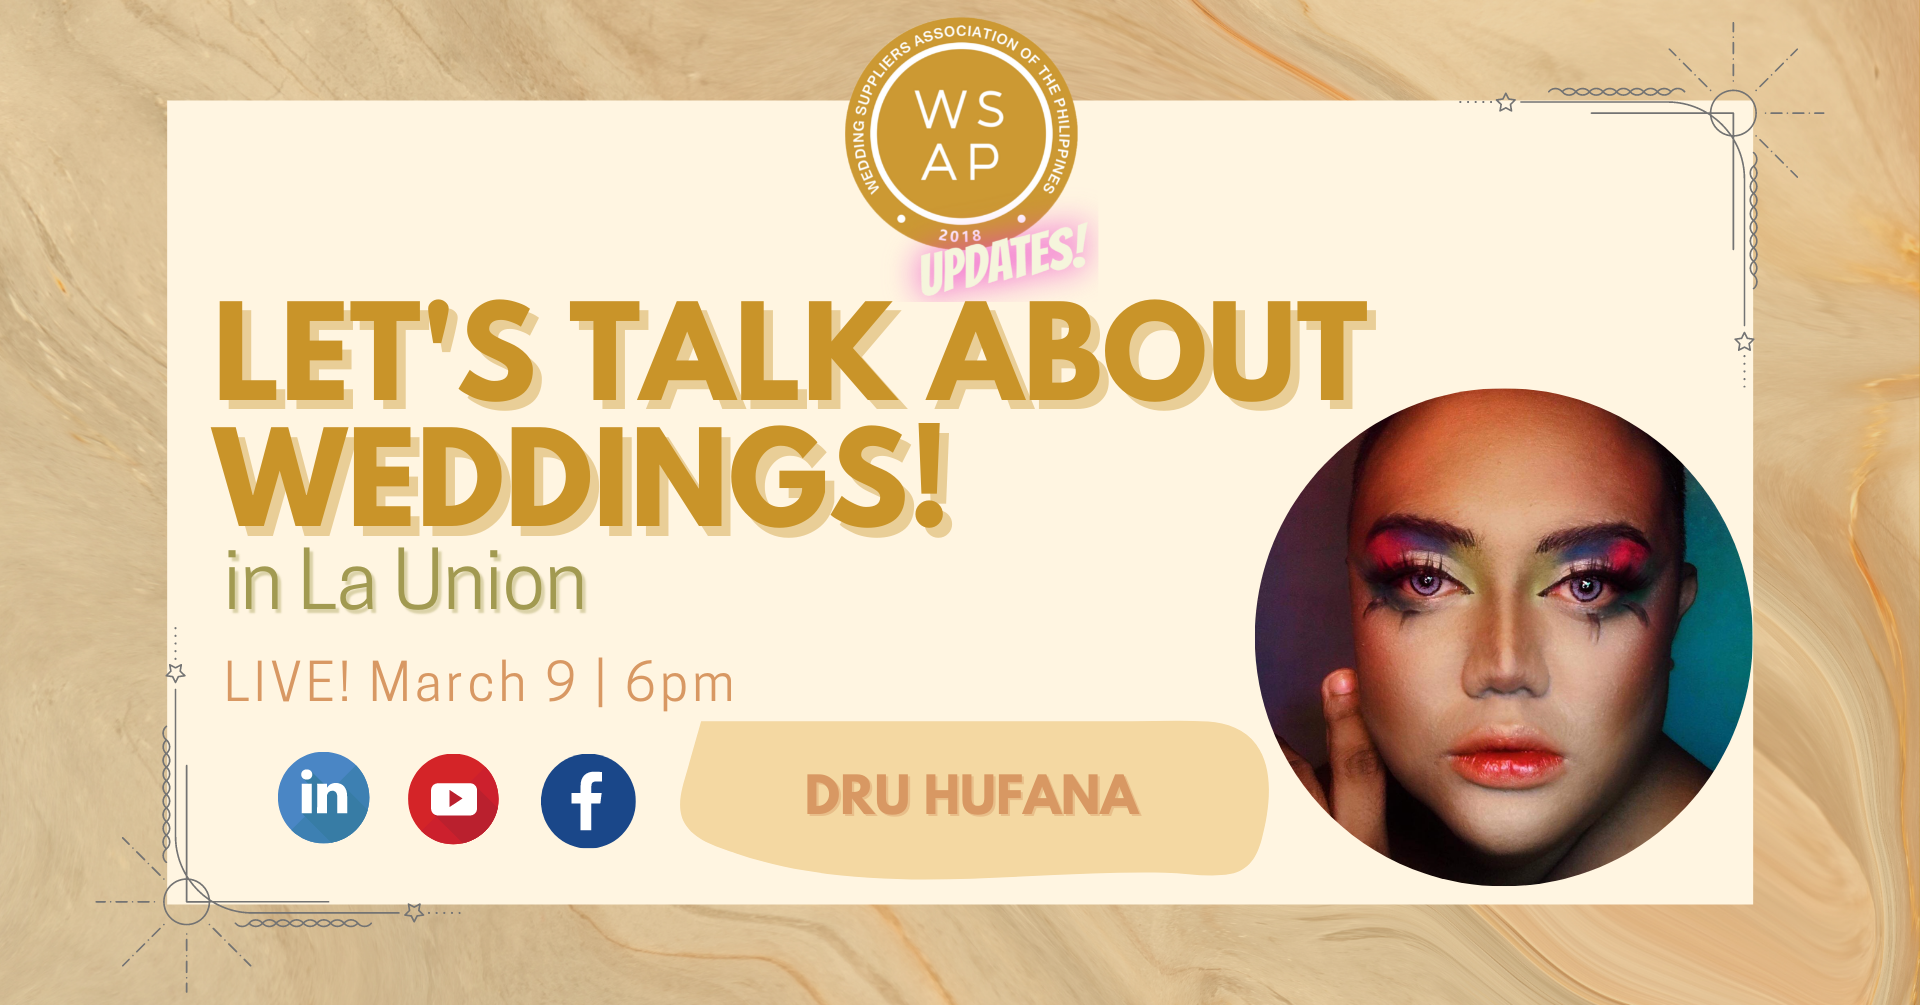 Let's Talk About Weddings in La Union with Dru Hufana